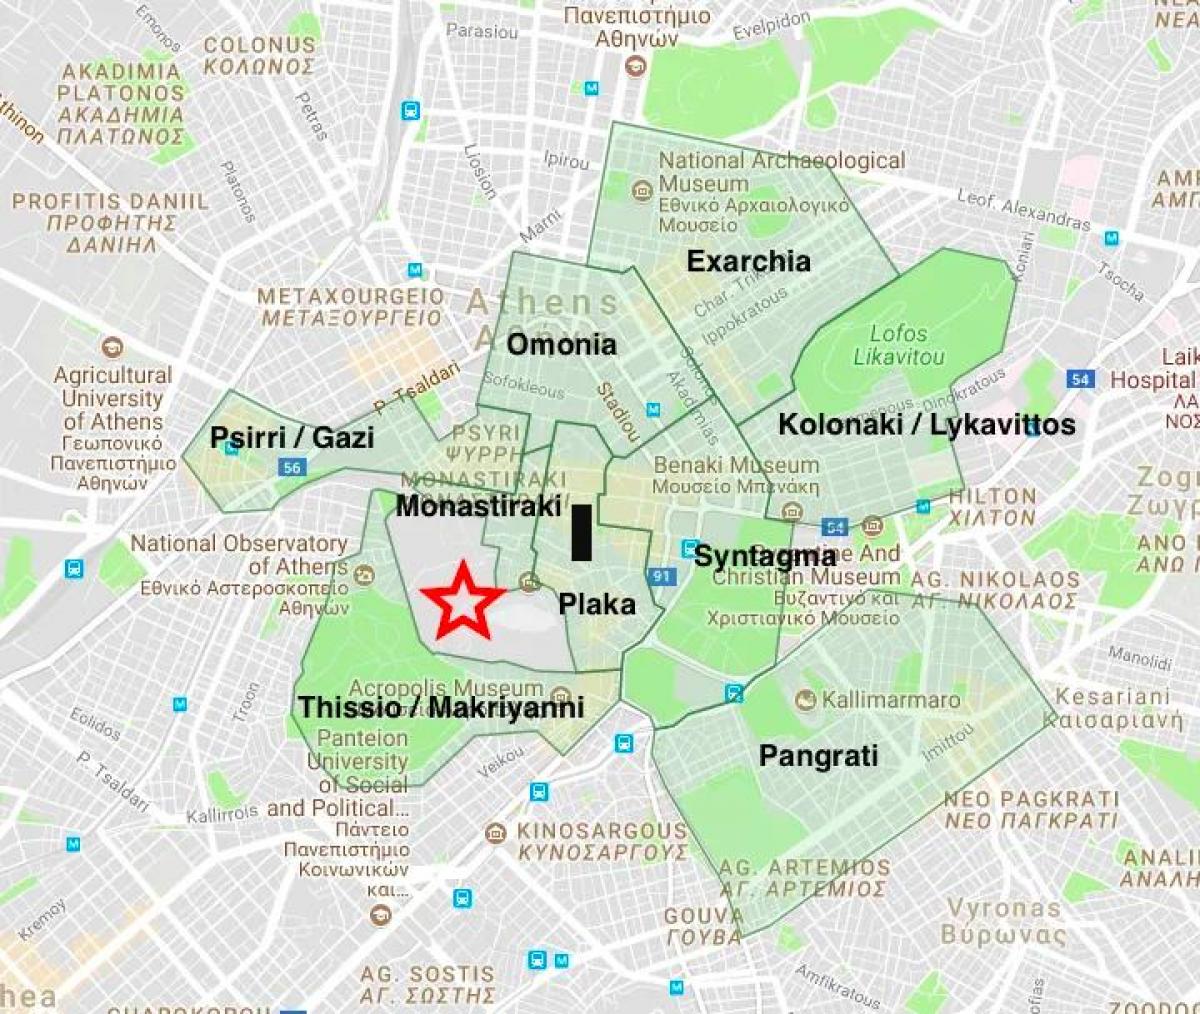 Athens maps: transport maps and tourist maps of Athens in Greece